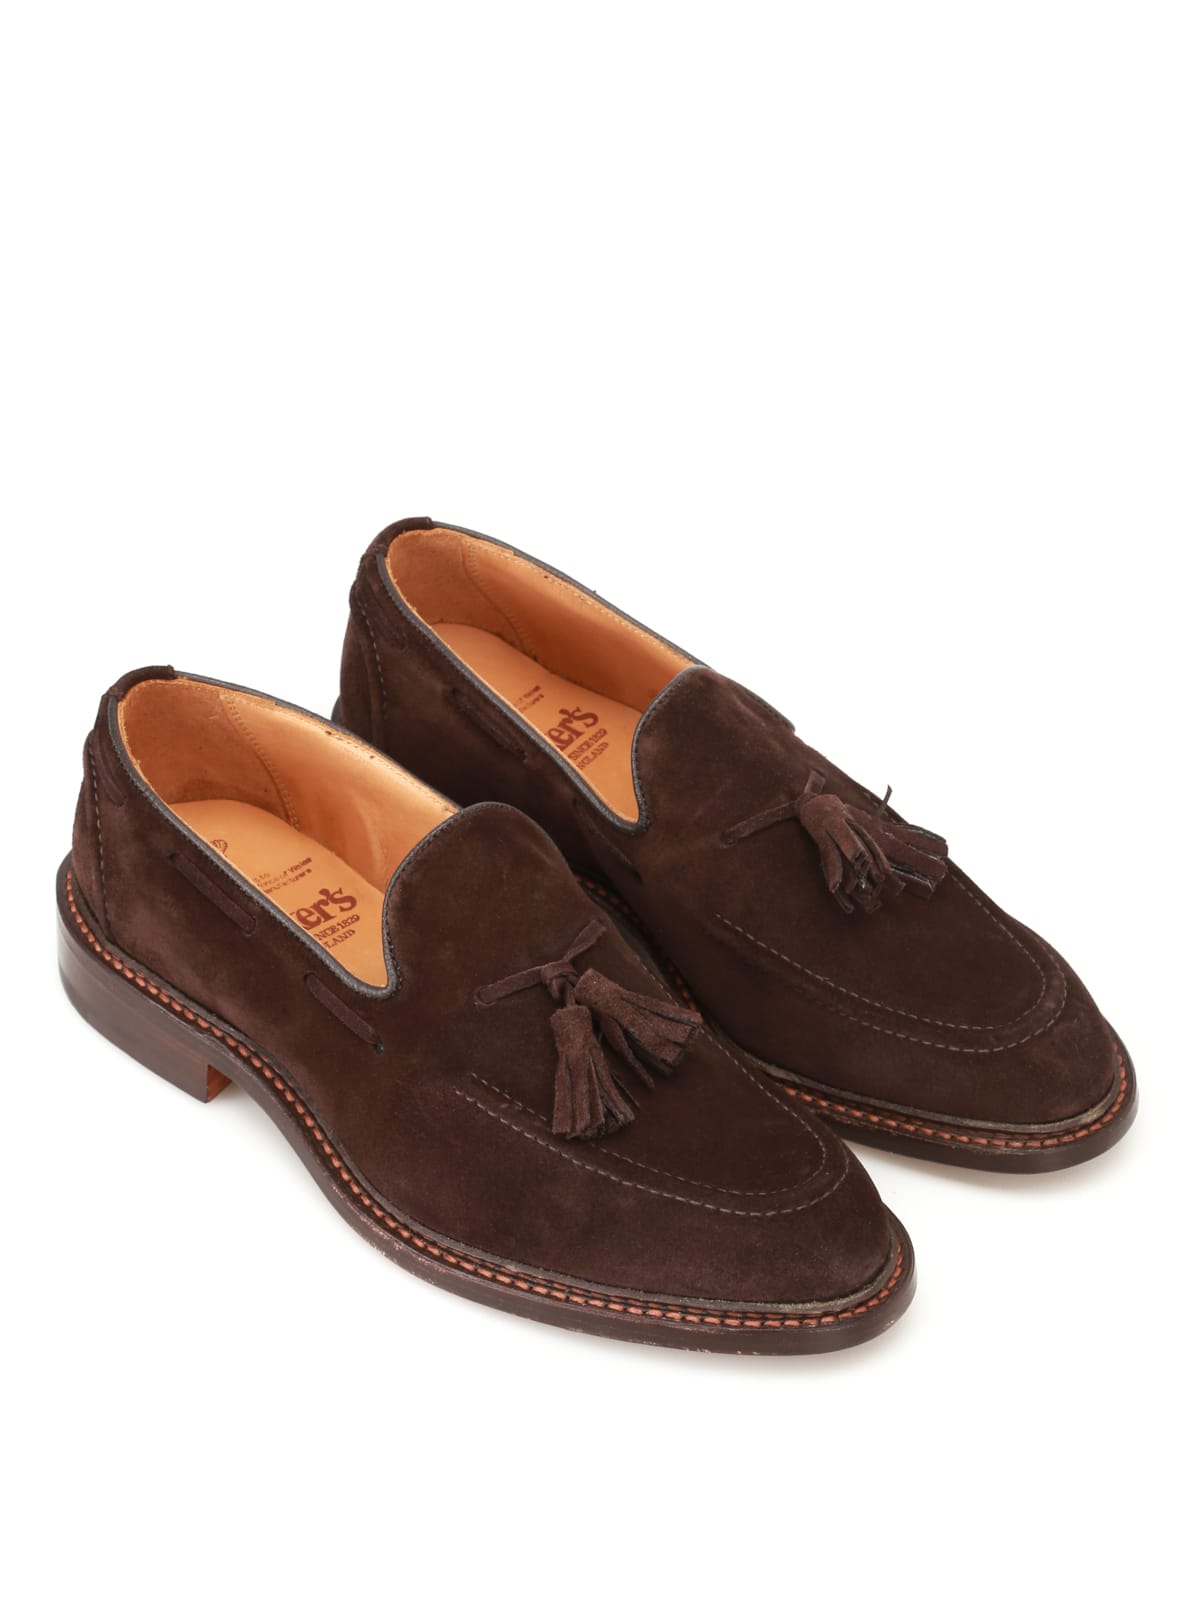 Loafers \u0026 Boat Shoes | italist 